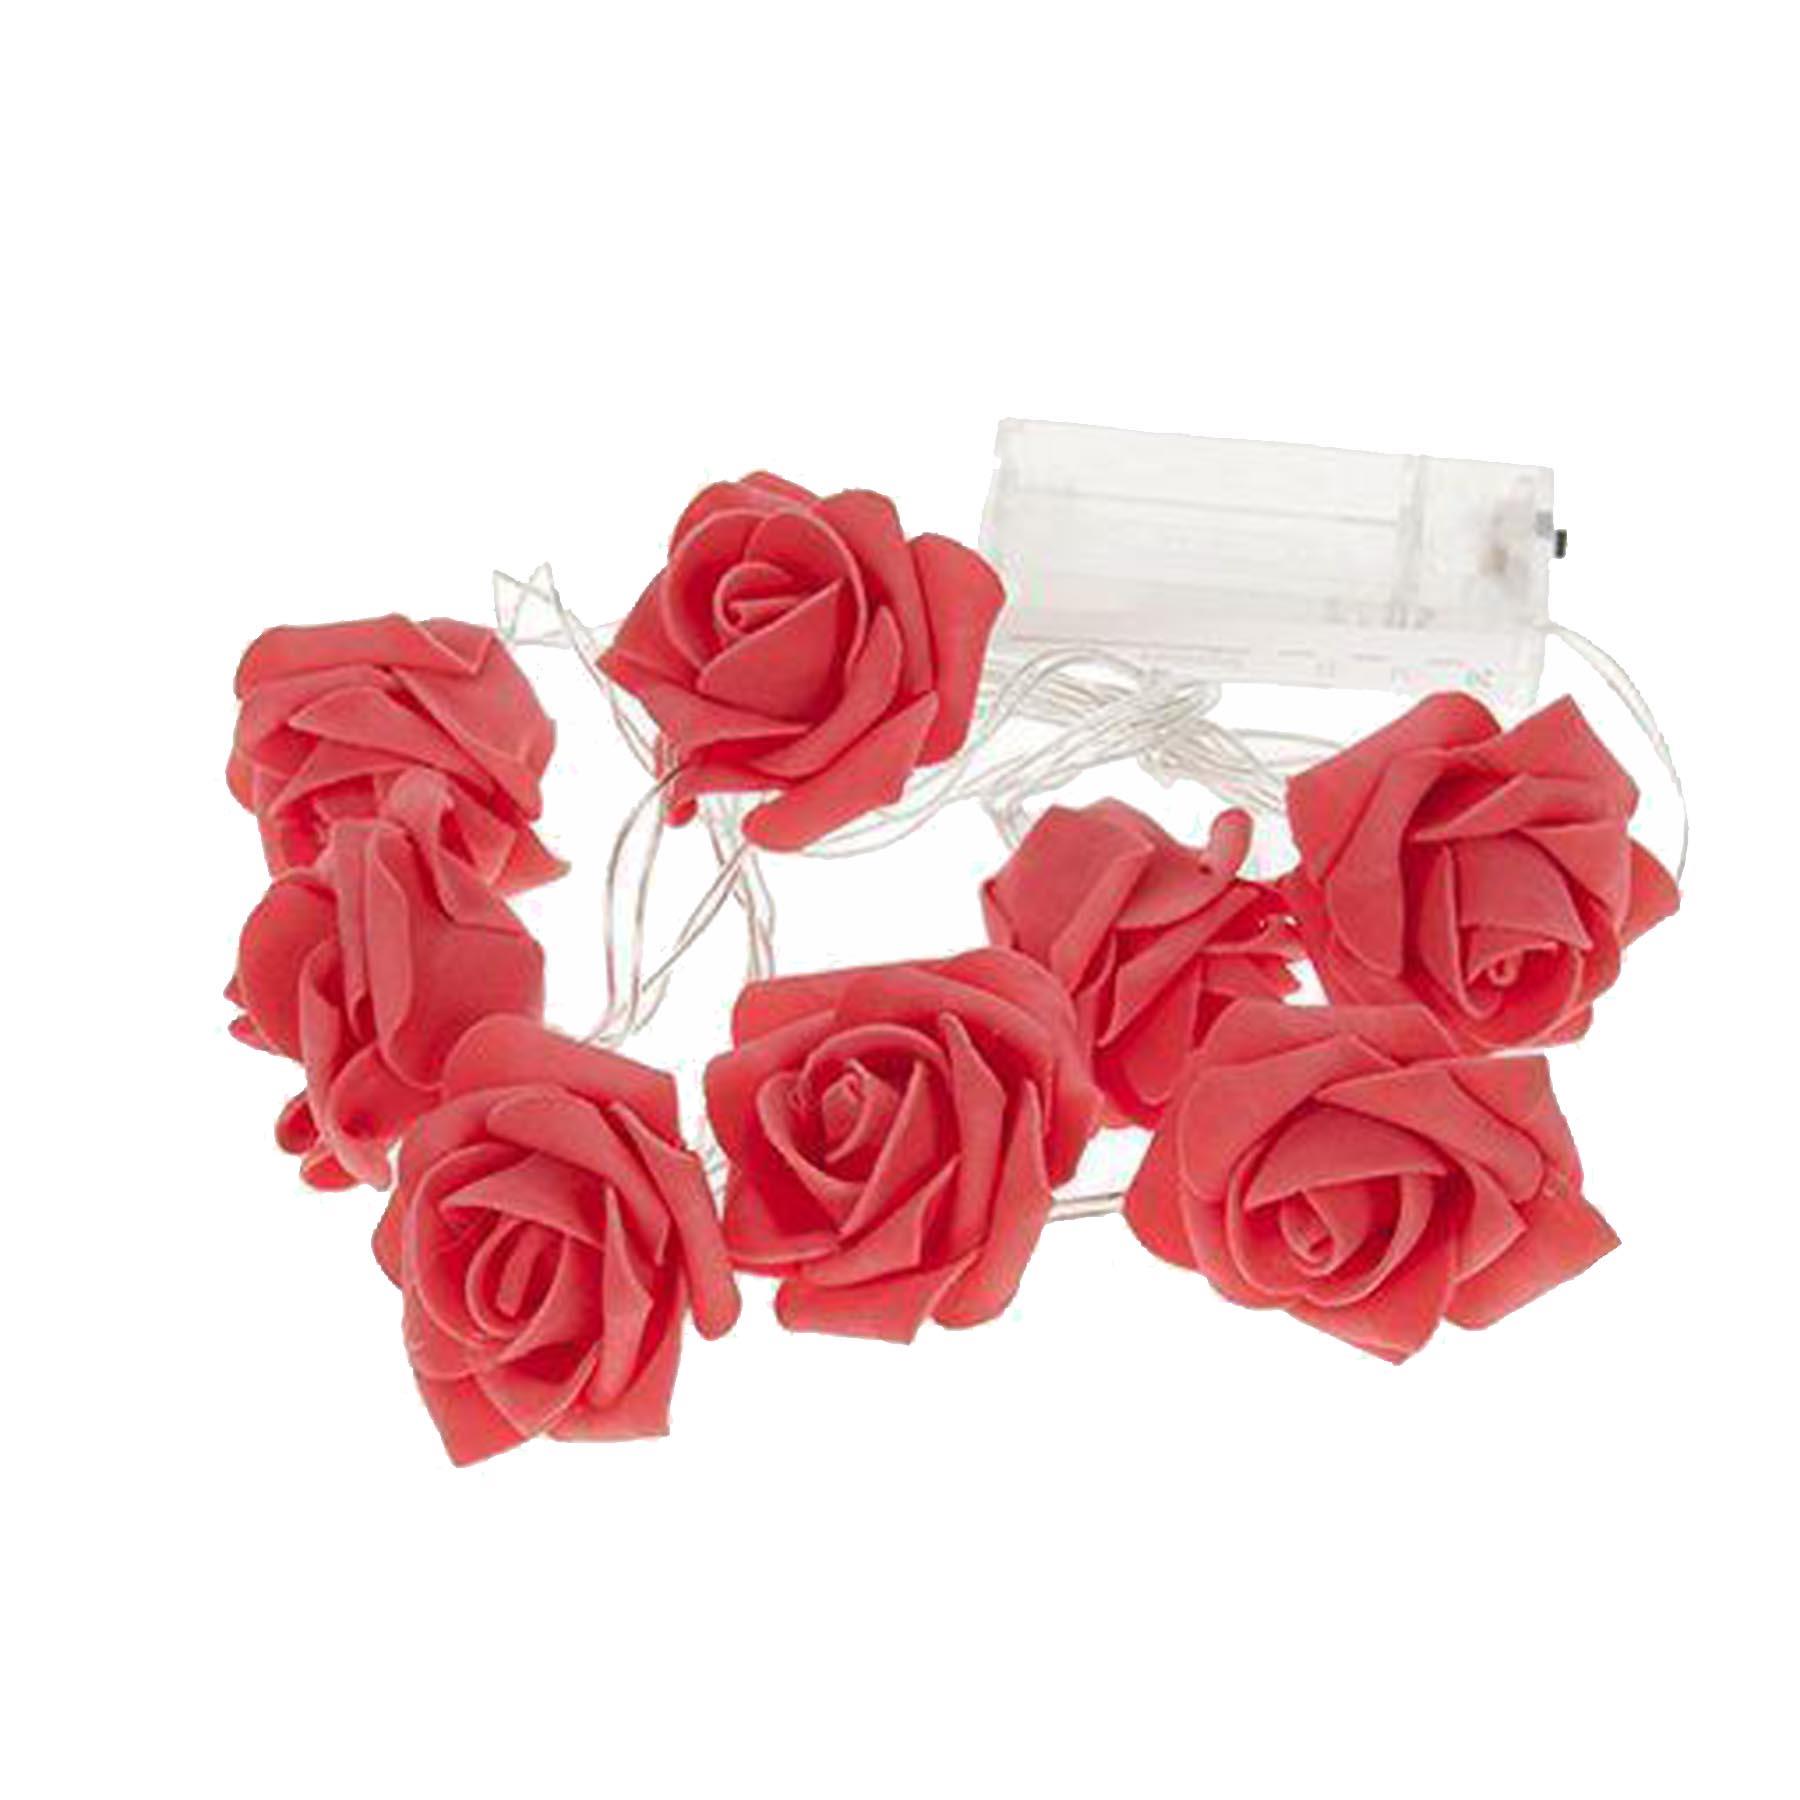 8 Pack Artificial Foam Red Rose Battery String Lights Wedding Valentines Day